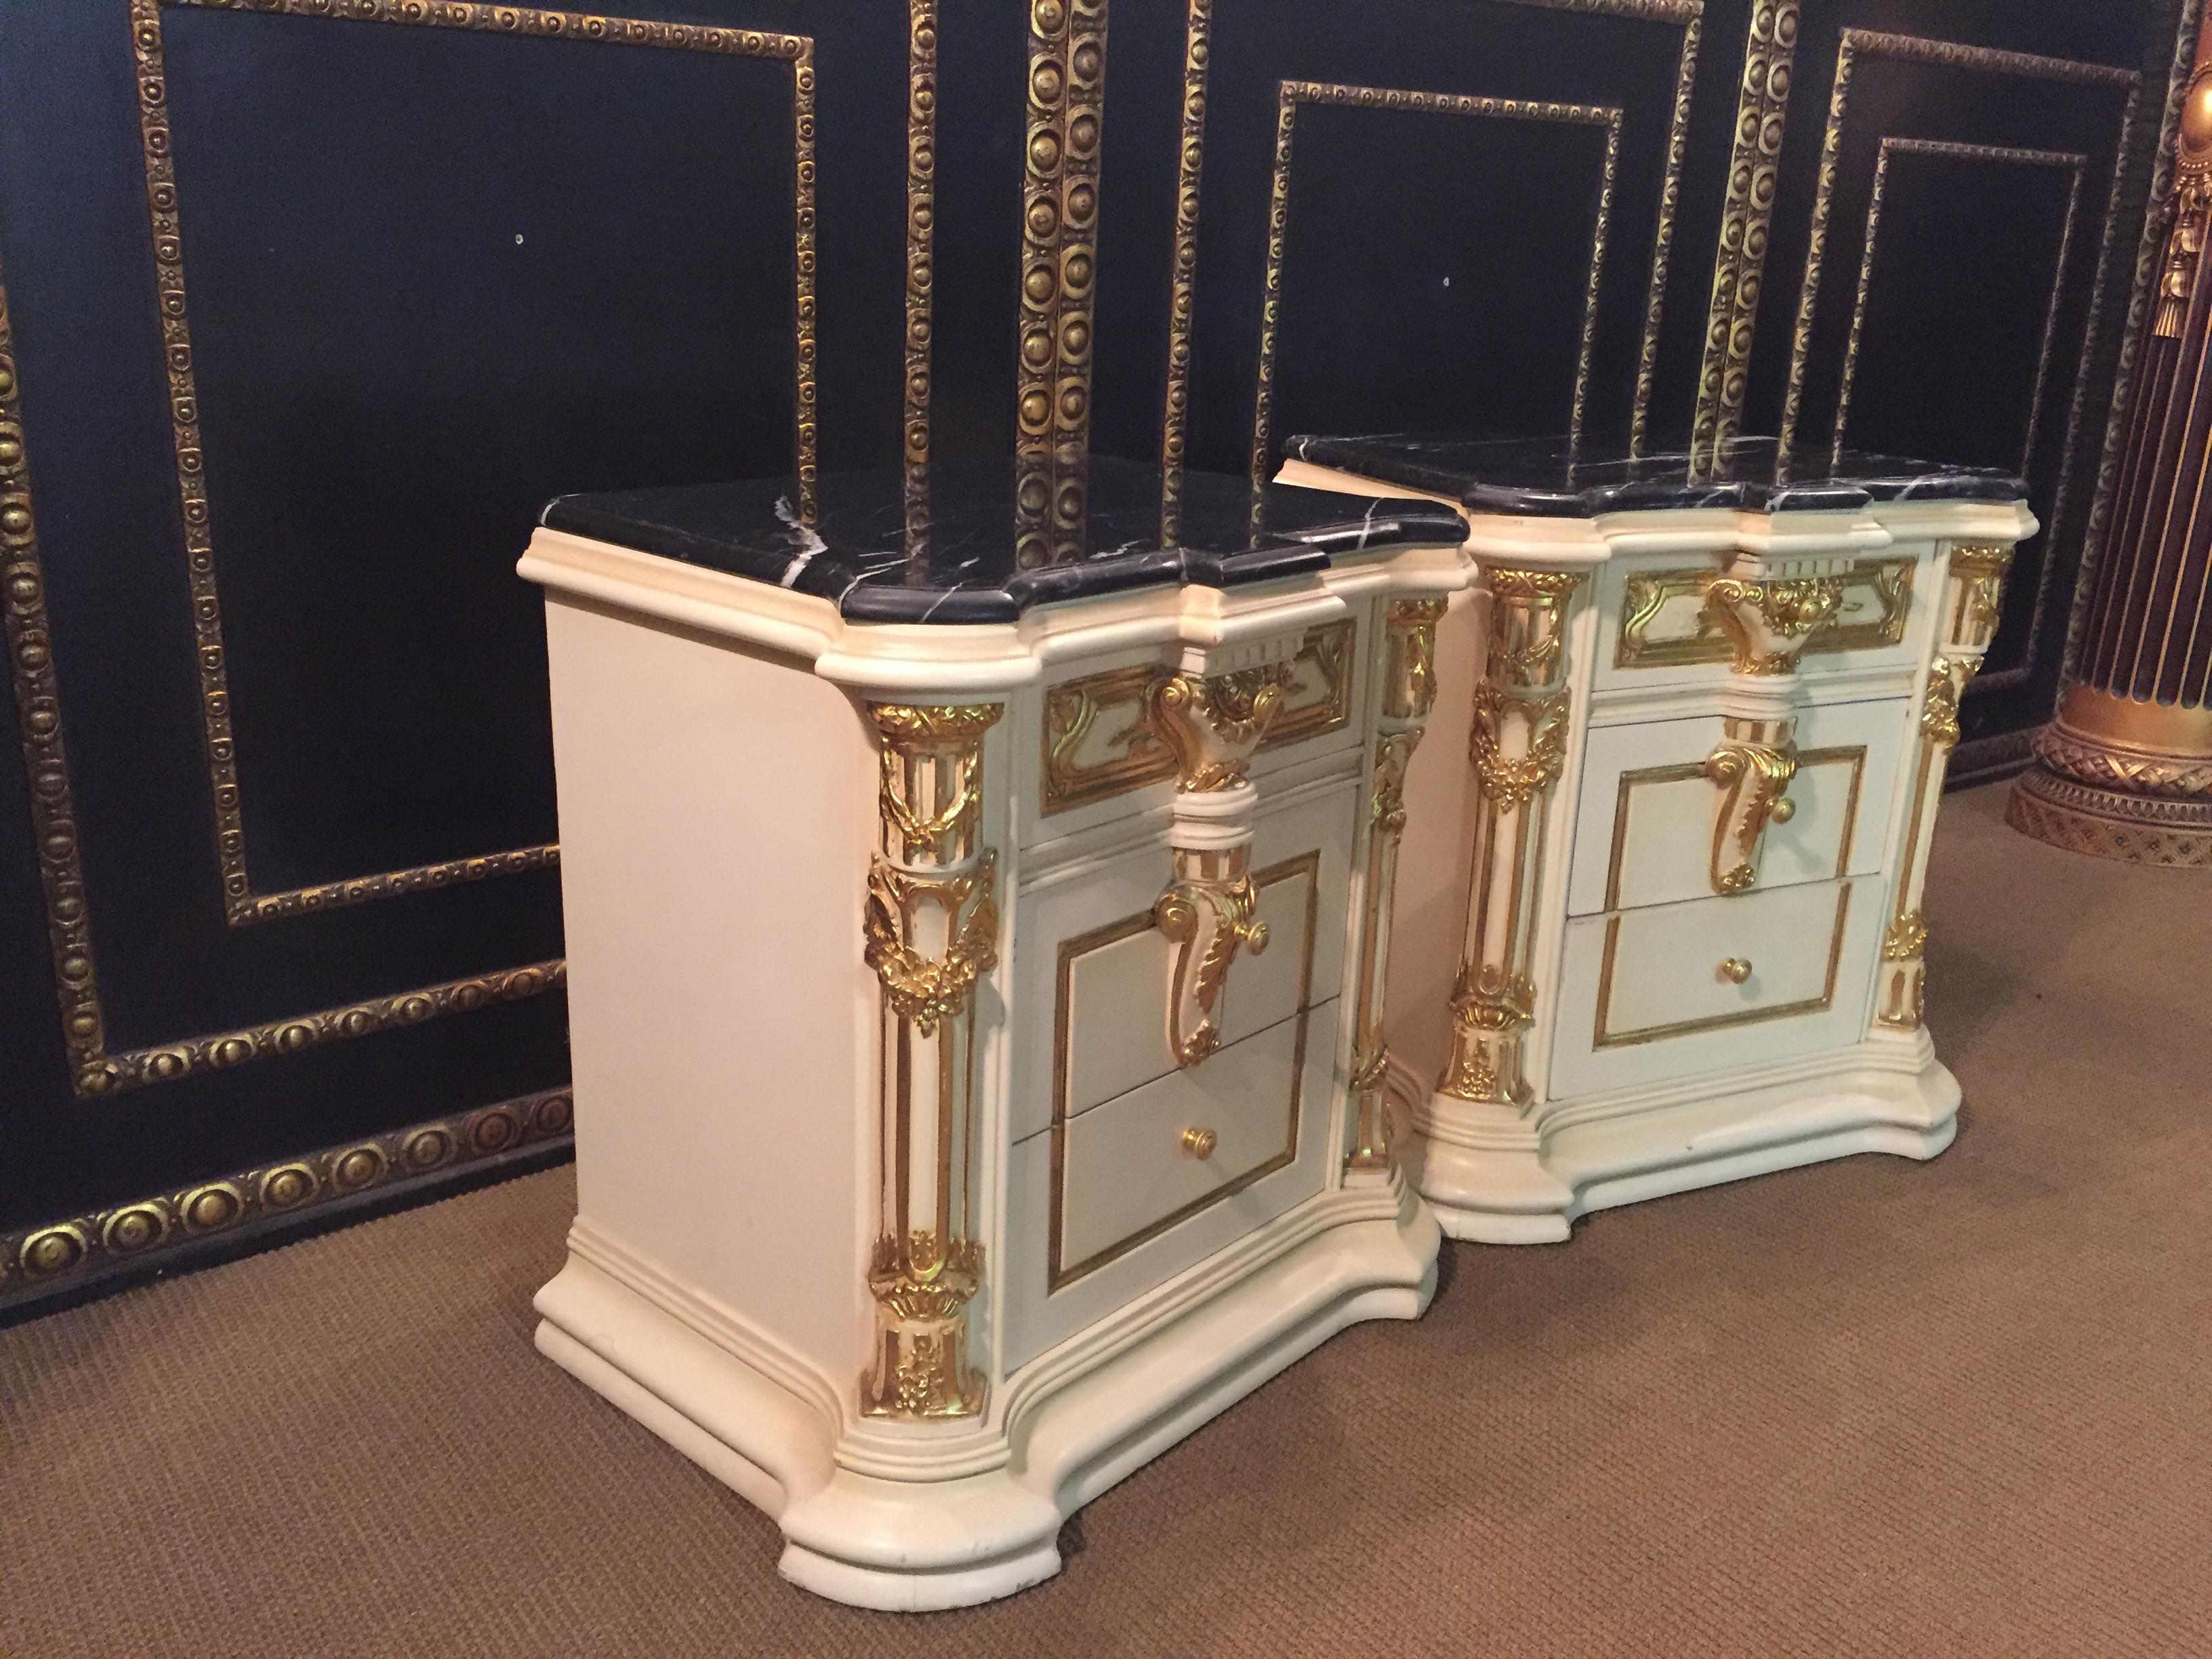 20th Century Majestic Baroque Bedside Commode in the Style of Louis XVI